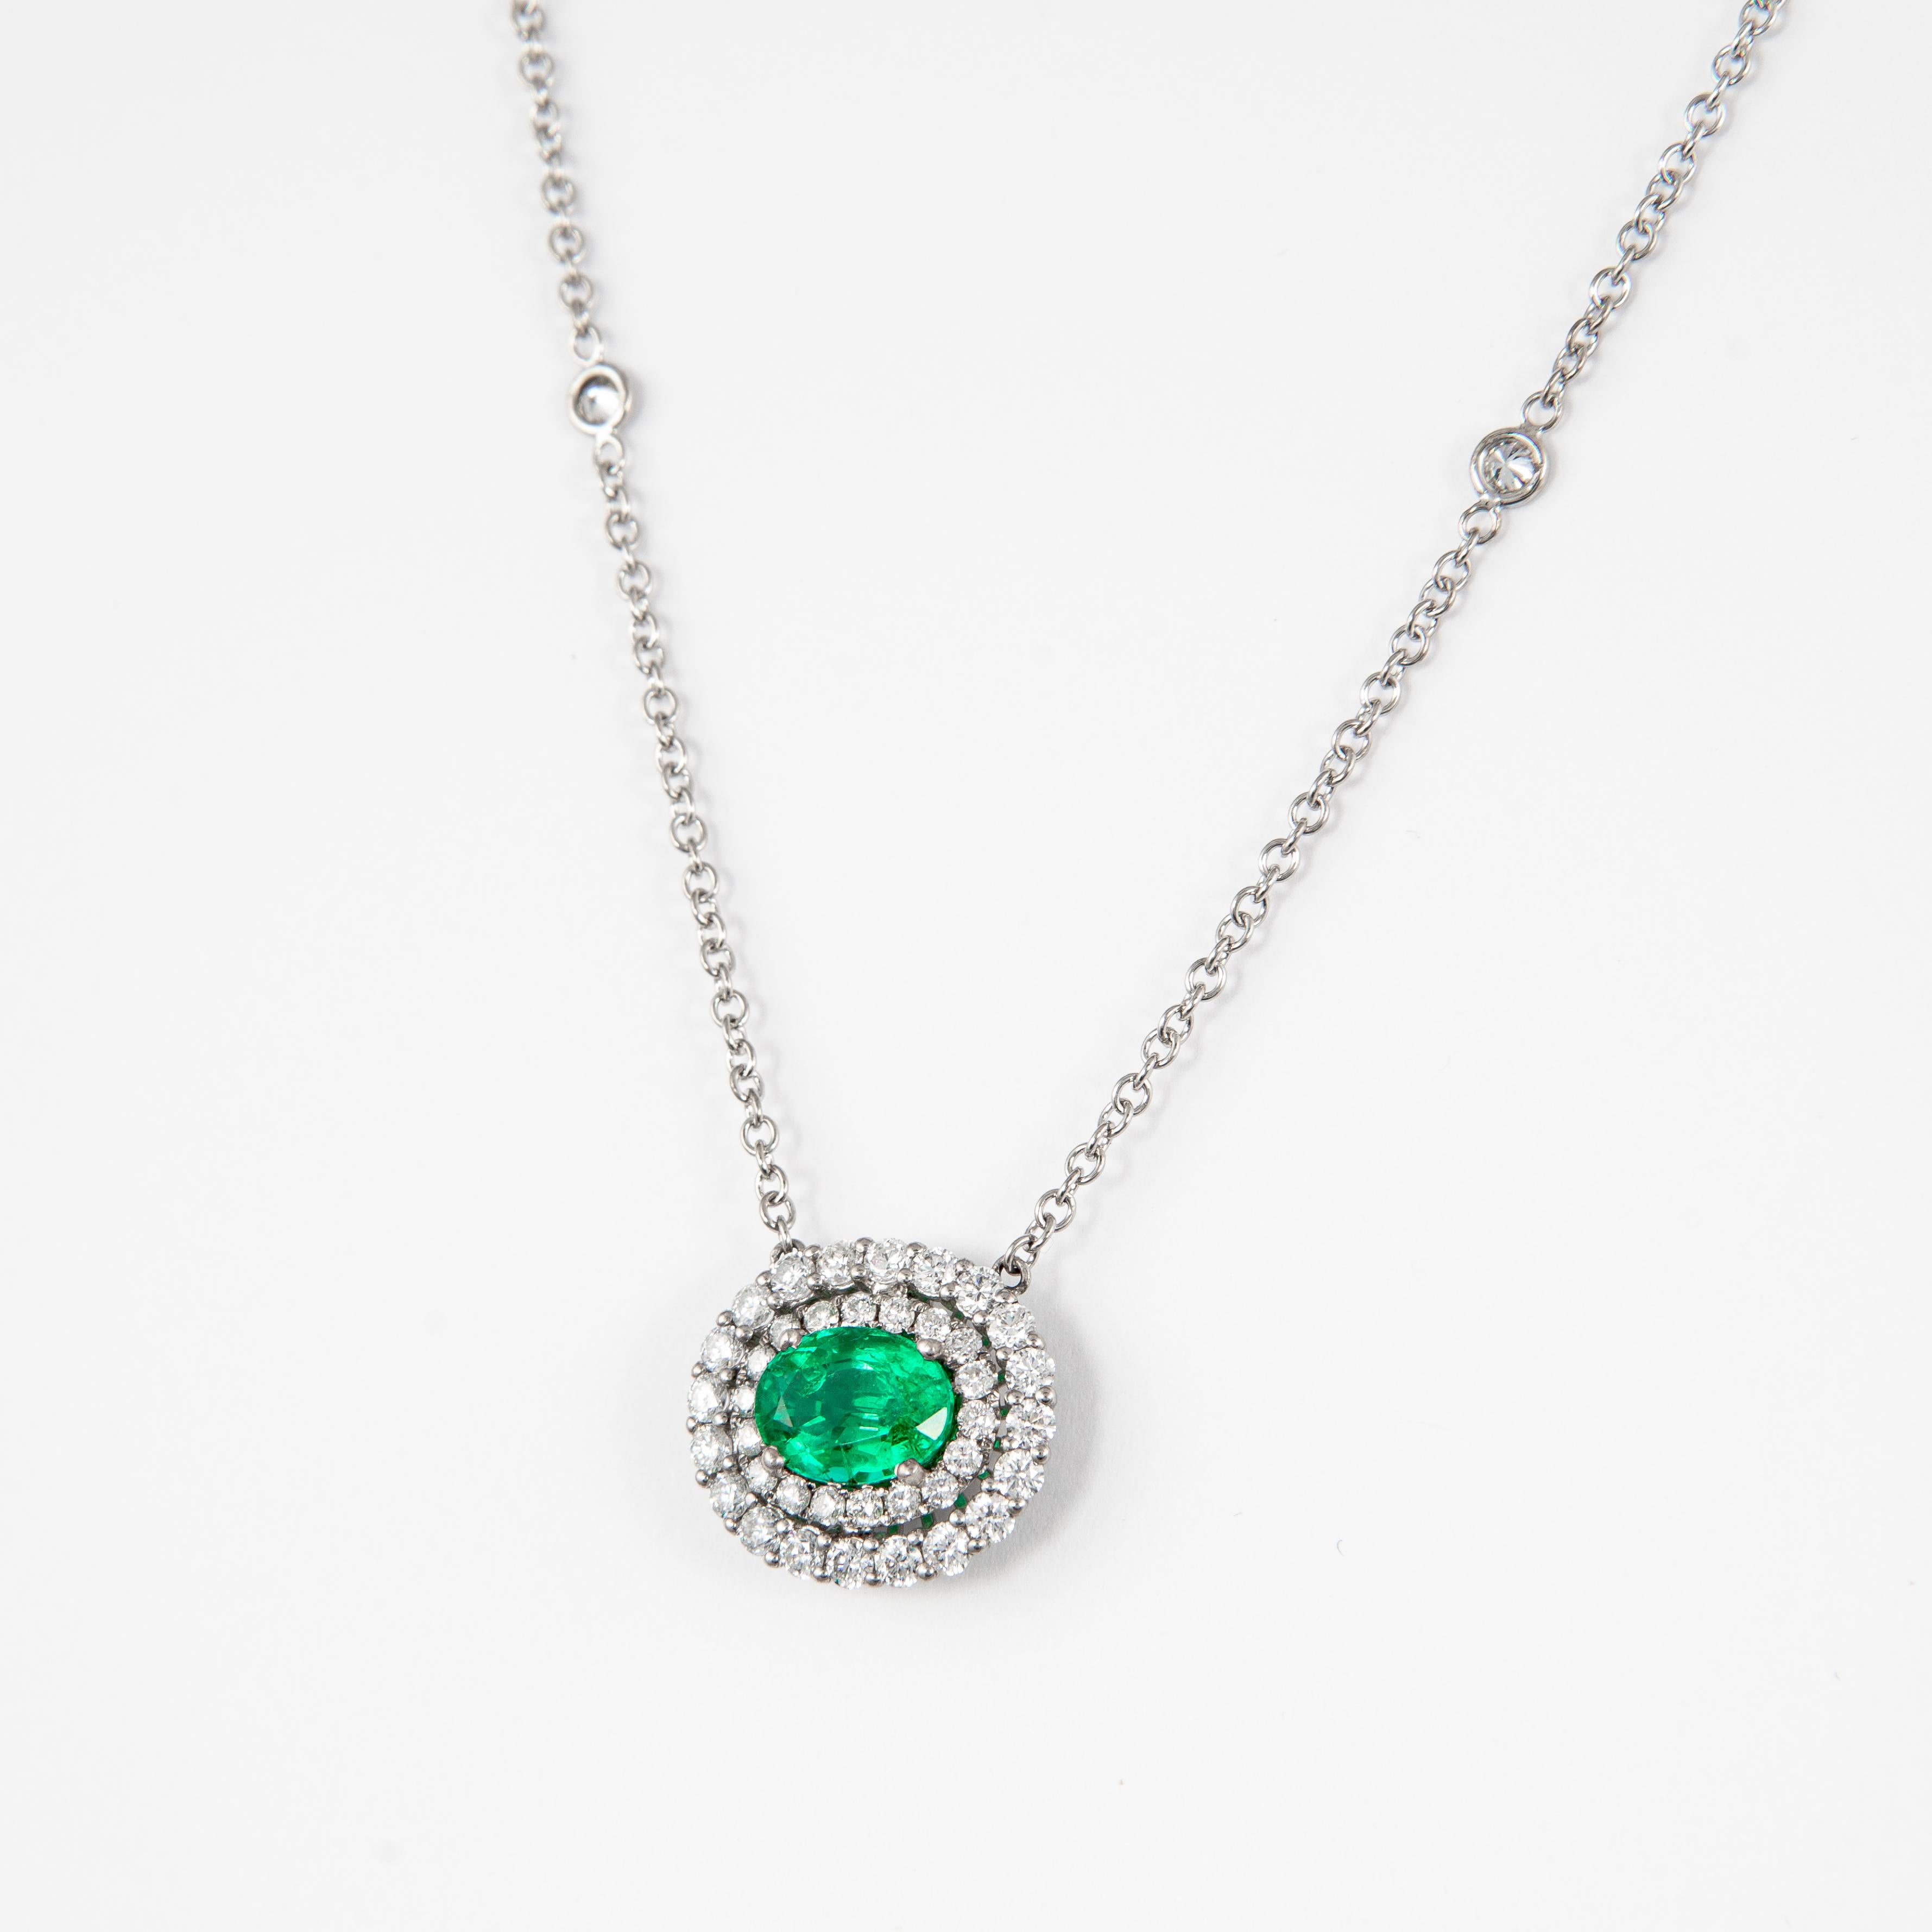 Oval Cut Alexander 1.79ct Oval Emerald with Diamond Halo 18k White Gold Pendant Necklace